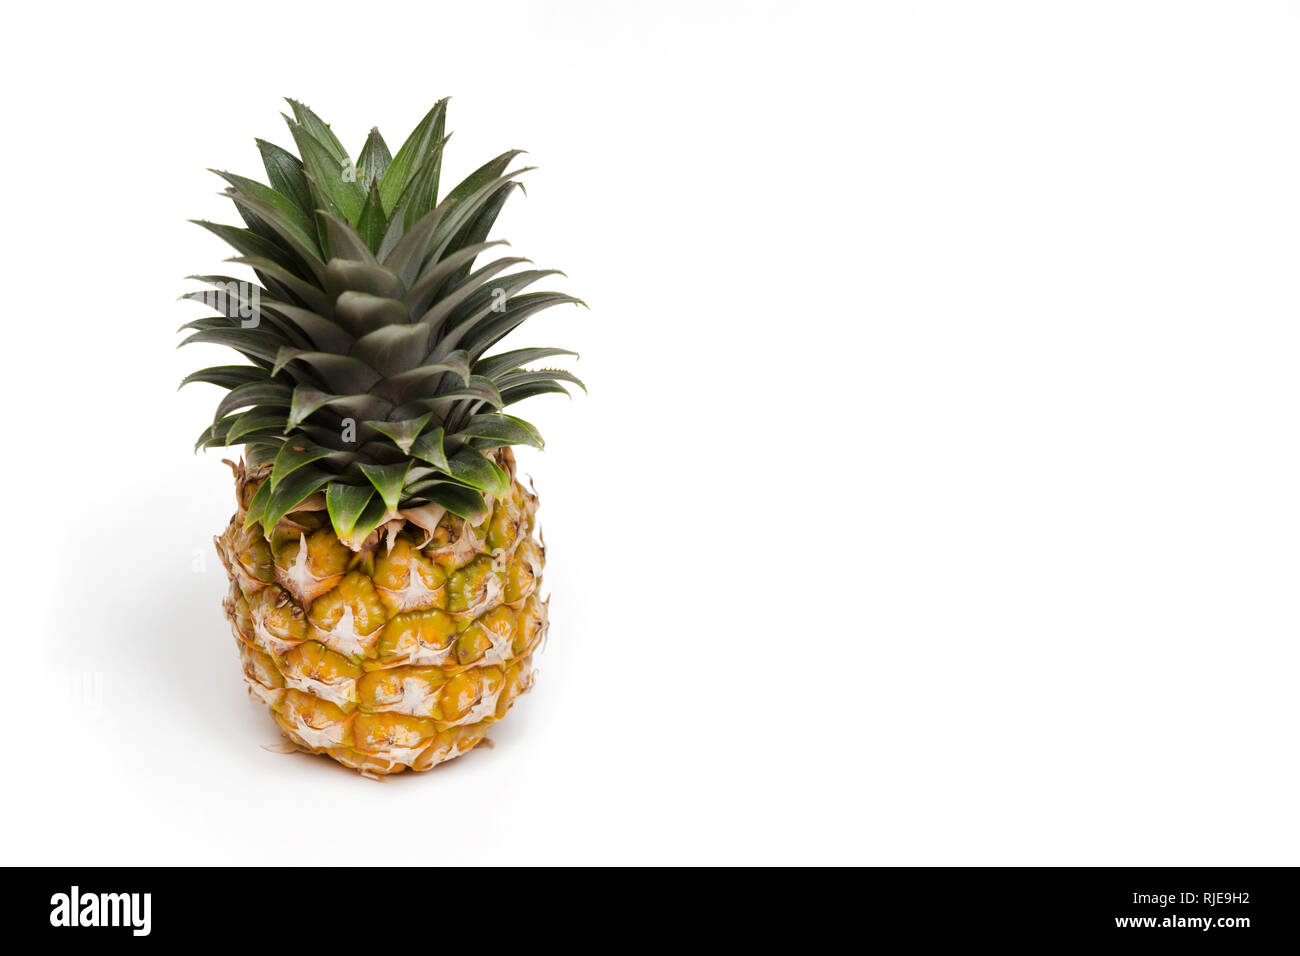 A Little Organic Healthy Pineapple Fruit on White Background Stock Photo